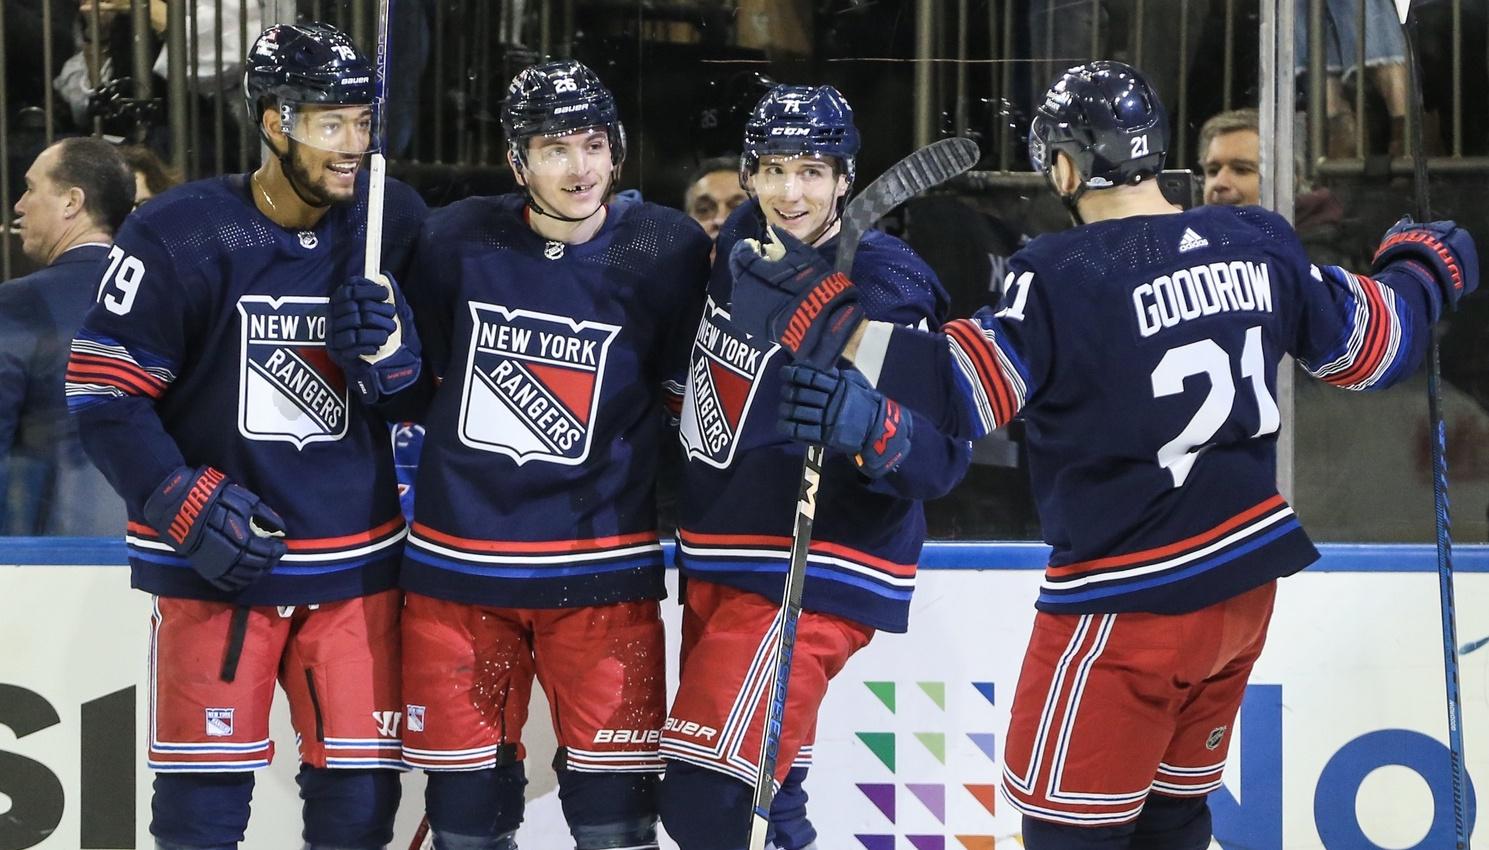 New York Rangers left wing Jimmy Vesey (26) celebrates with his teammates after scoring a goal in the second period against the Tampa Bay Lightning at Madison Square Garden. / Wendell Cruz-USA TODAY Sports